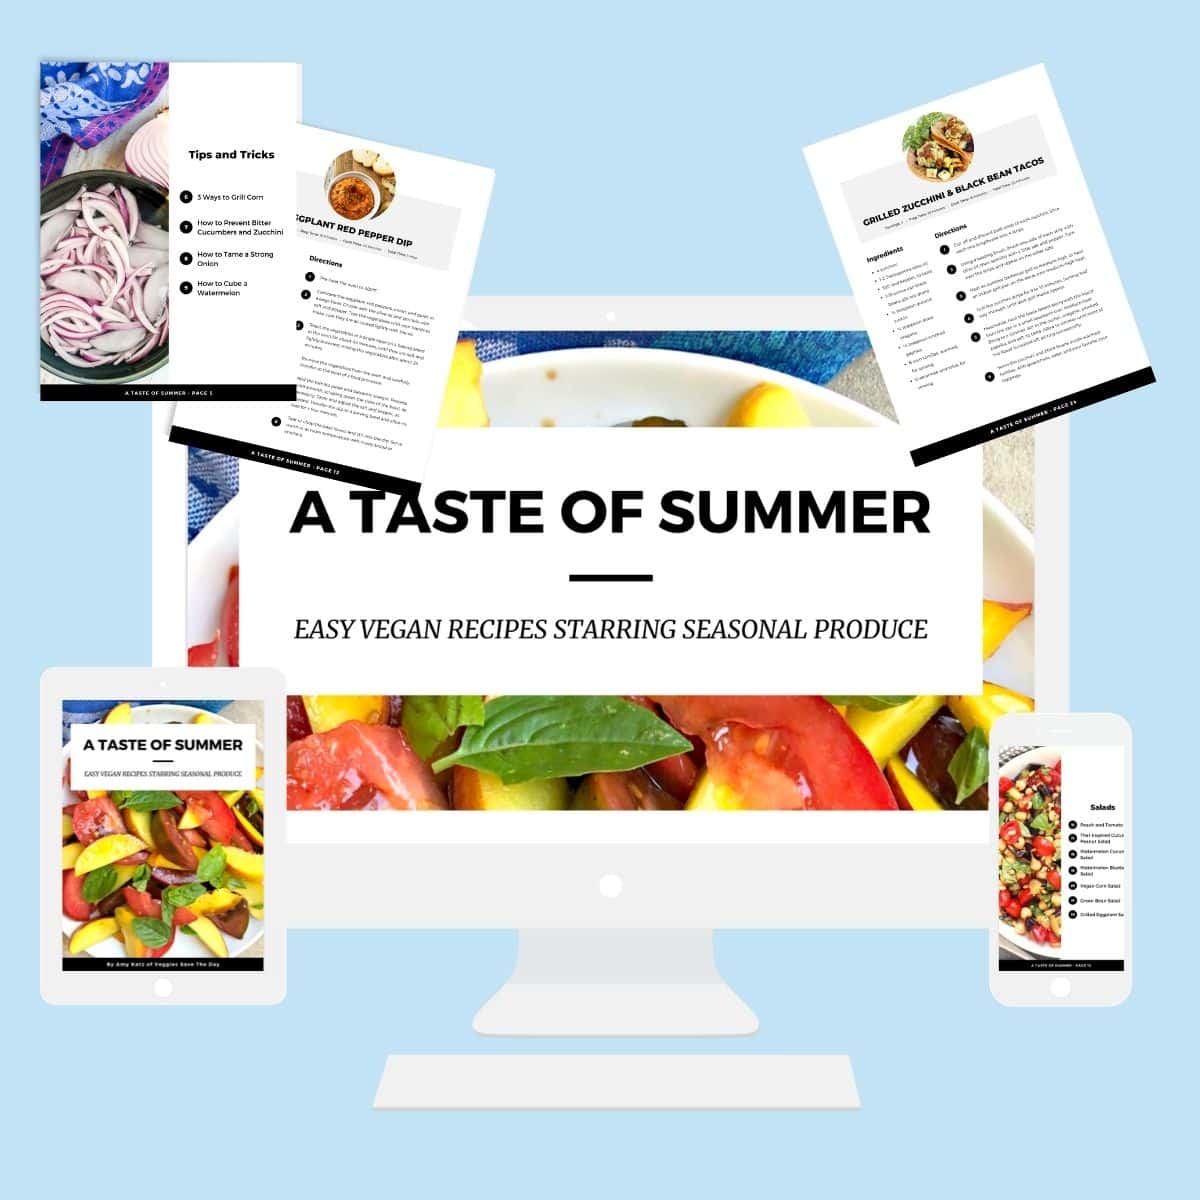 A Taste Of Summer eBook on a computer, tablet, and iPhone plus a few pages from the cookbook